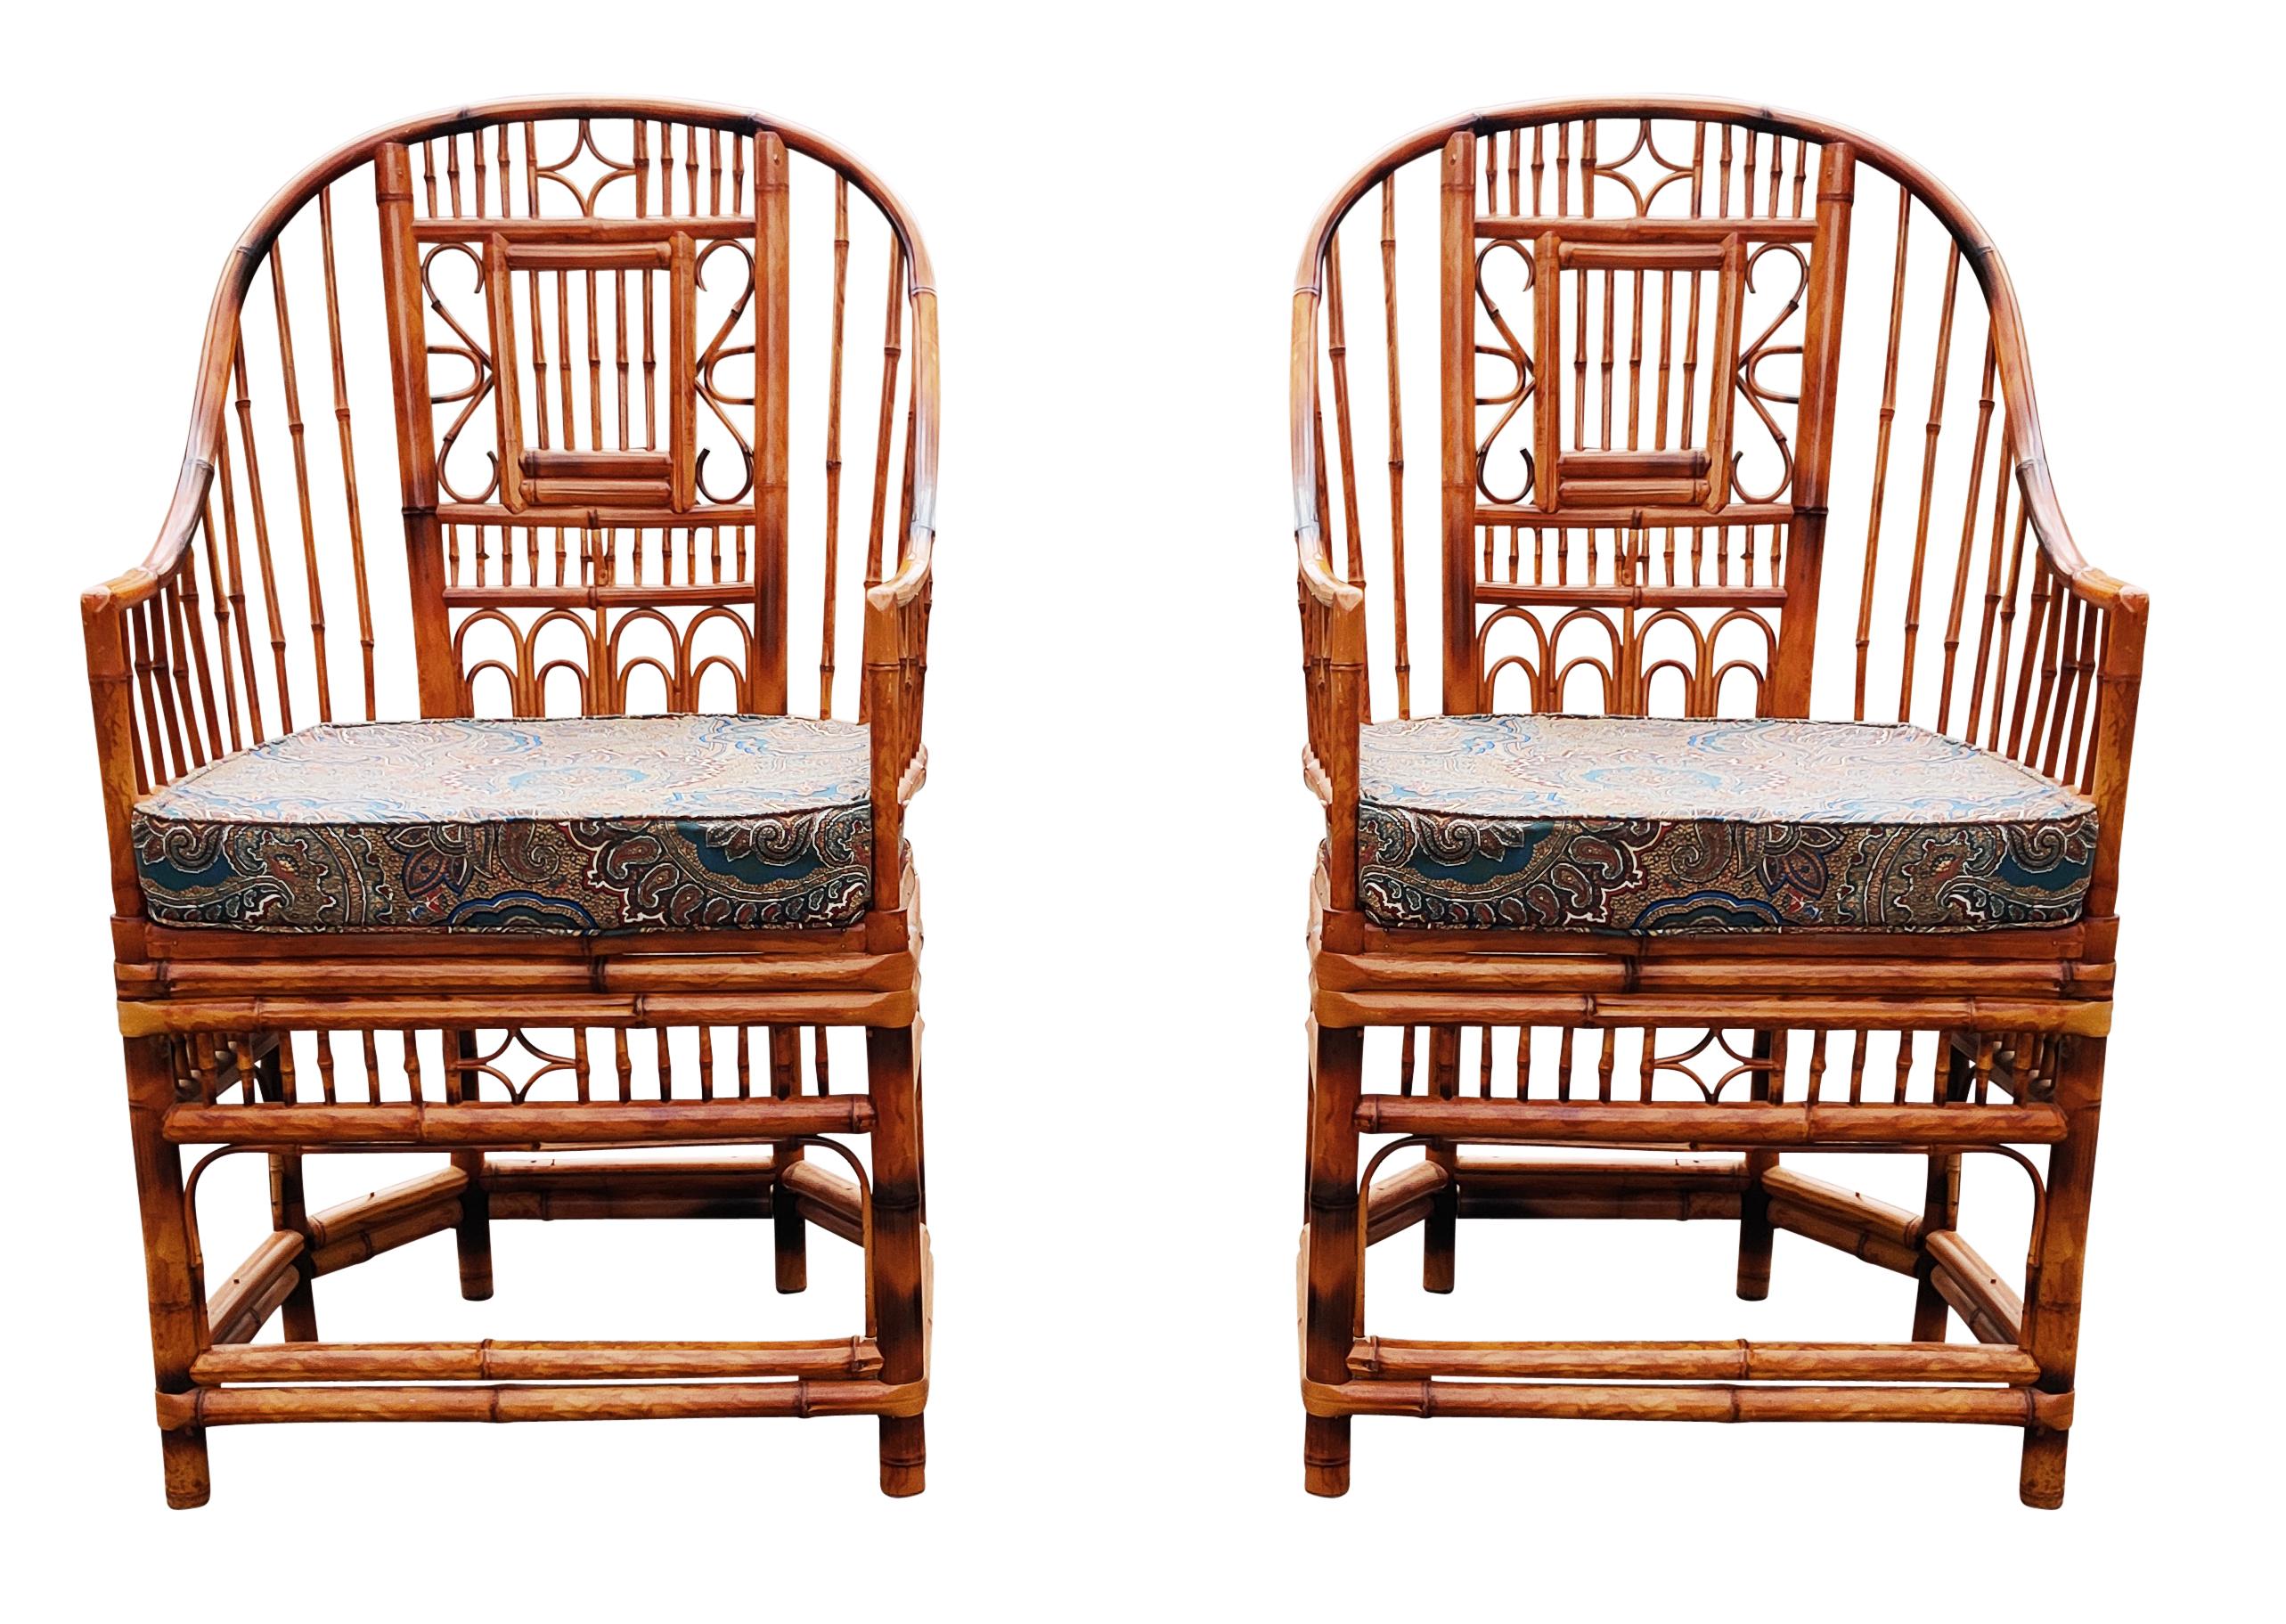 A apir chinoiserie bamboo and cane armchairs in the manner of Brighton Pavillion. A timeless design that has a split frame and upright back. They features intricate inset geometric and foliate bamboo openwork on each side, and smooth down swept